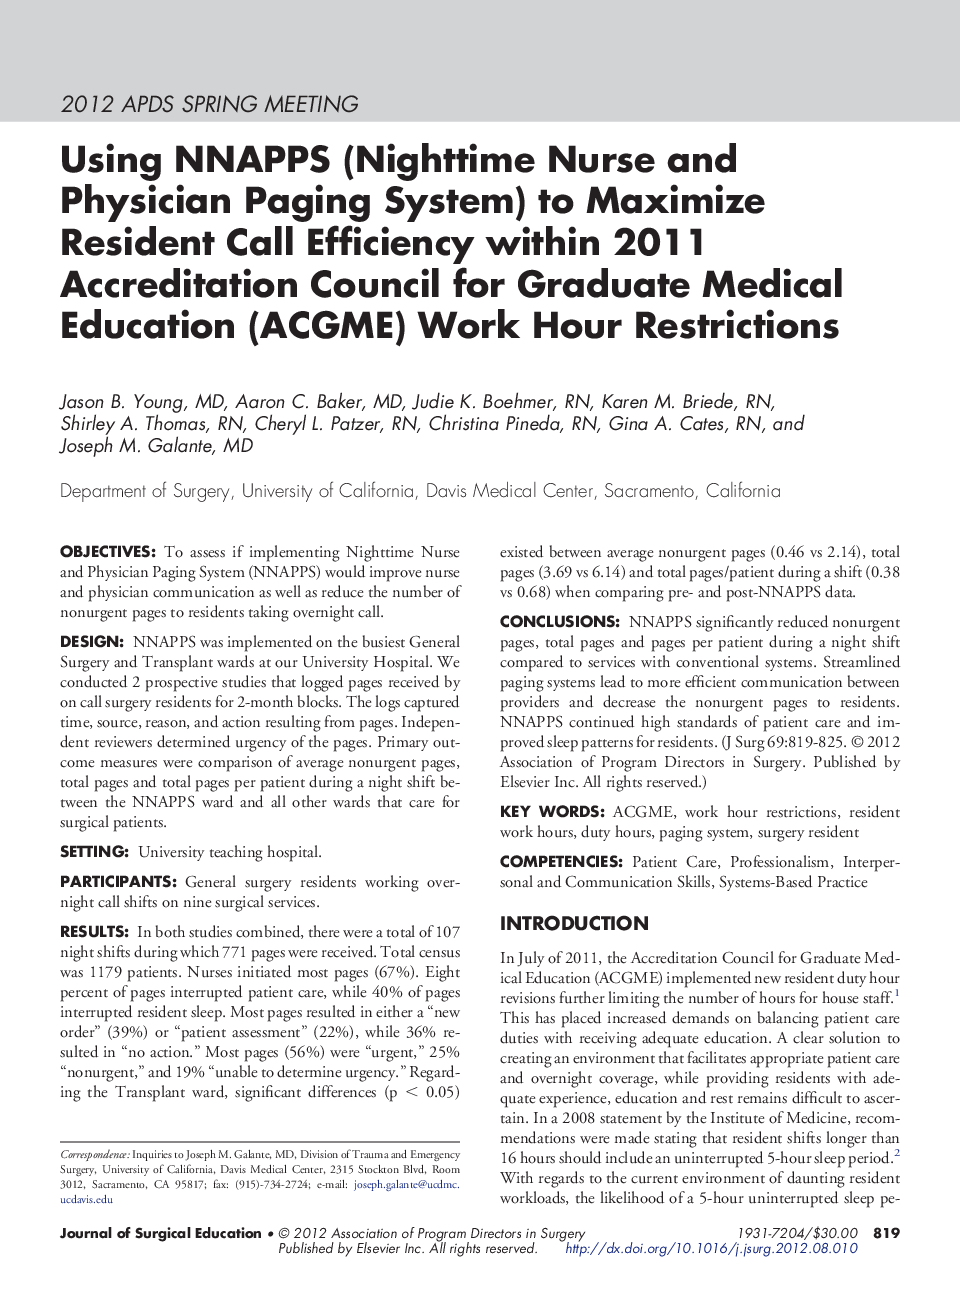 Using NNAPPS (Nighttime Nurse and Physician Paging System) to Maximize Resident Call Efficiency within 2011 Accreditation Council for Graduate Medical Education (ACGME) Work Hour Restrictions